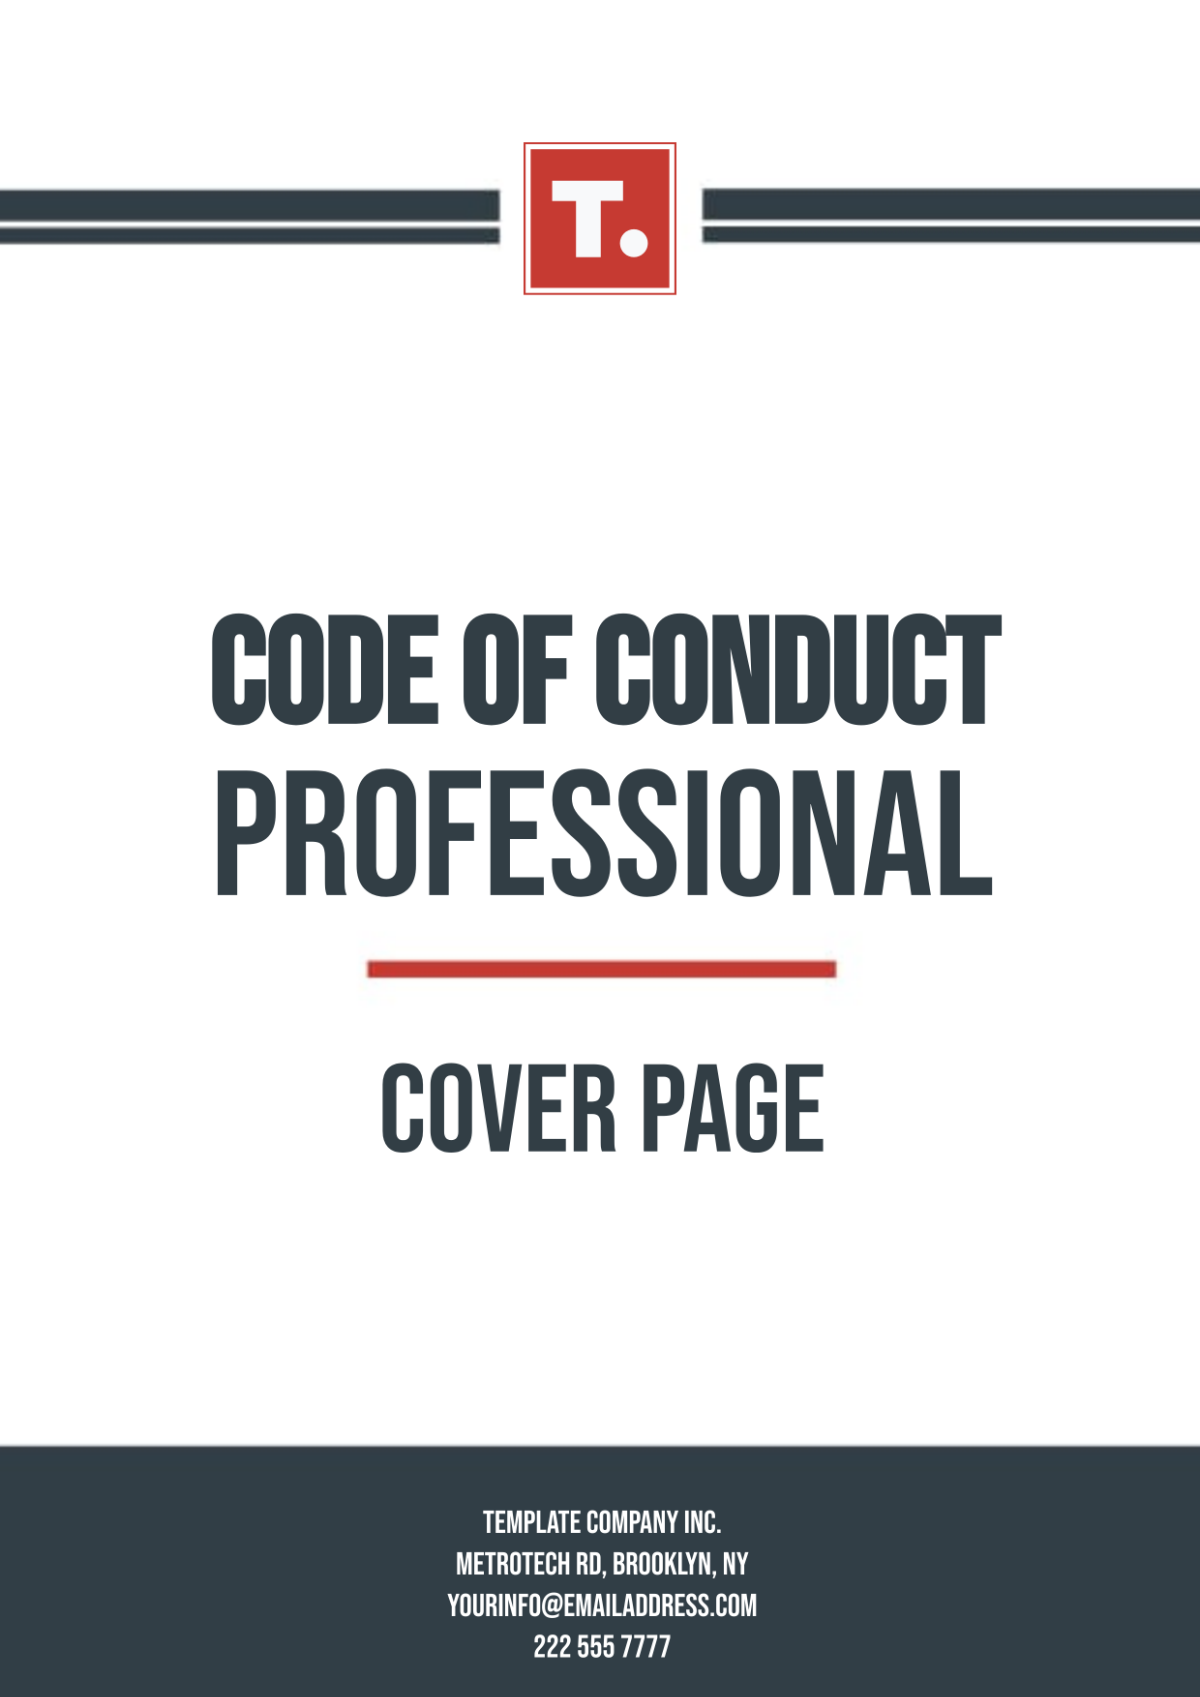 Code of Conduct Professional Cover Page